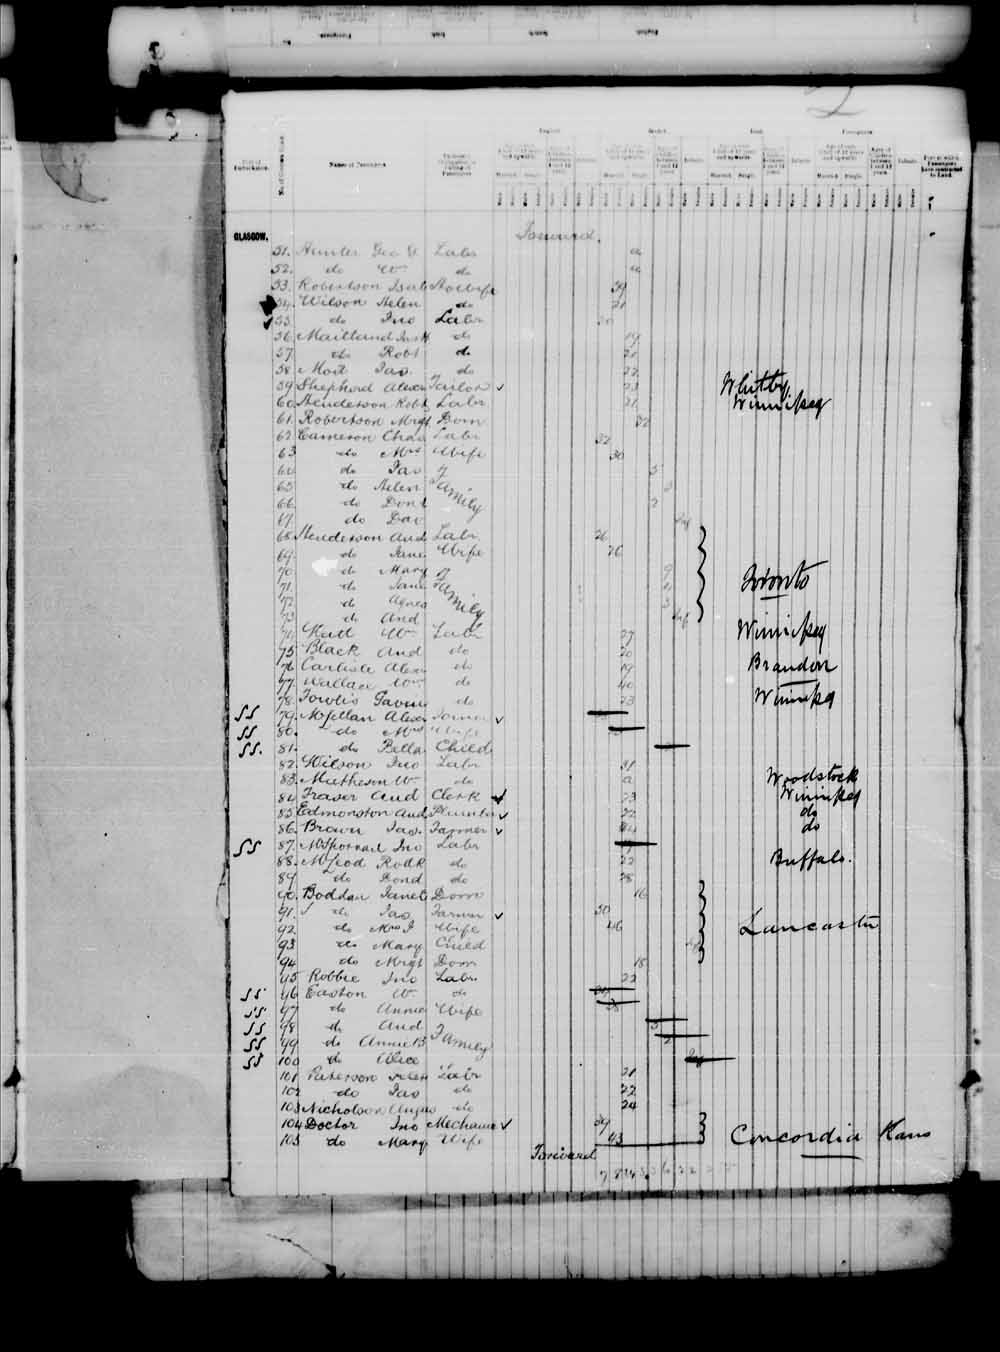 Digitized page of Passenger Lists for Image No.: e003542663